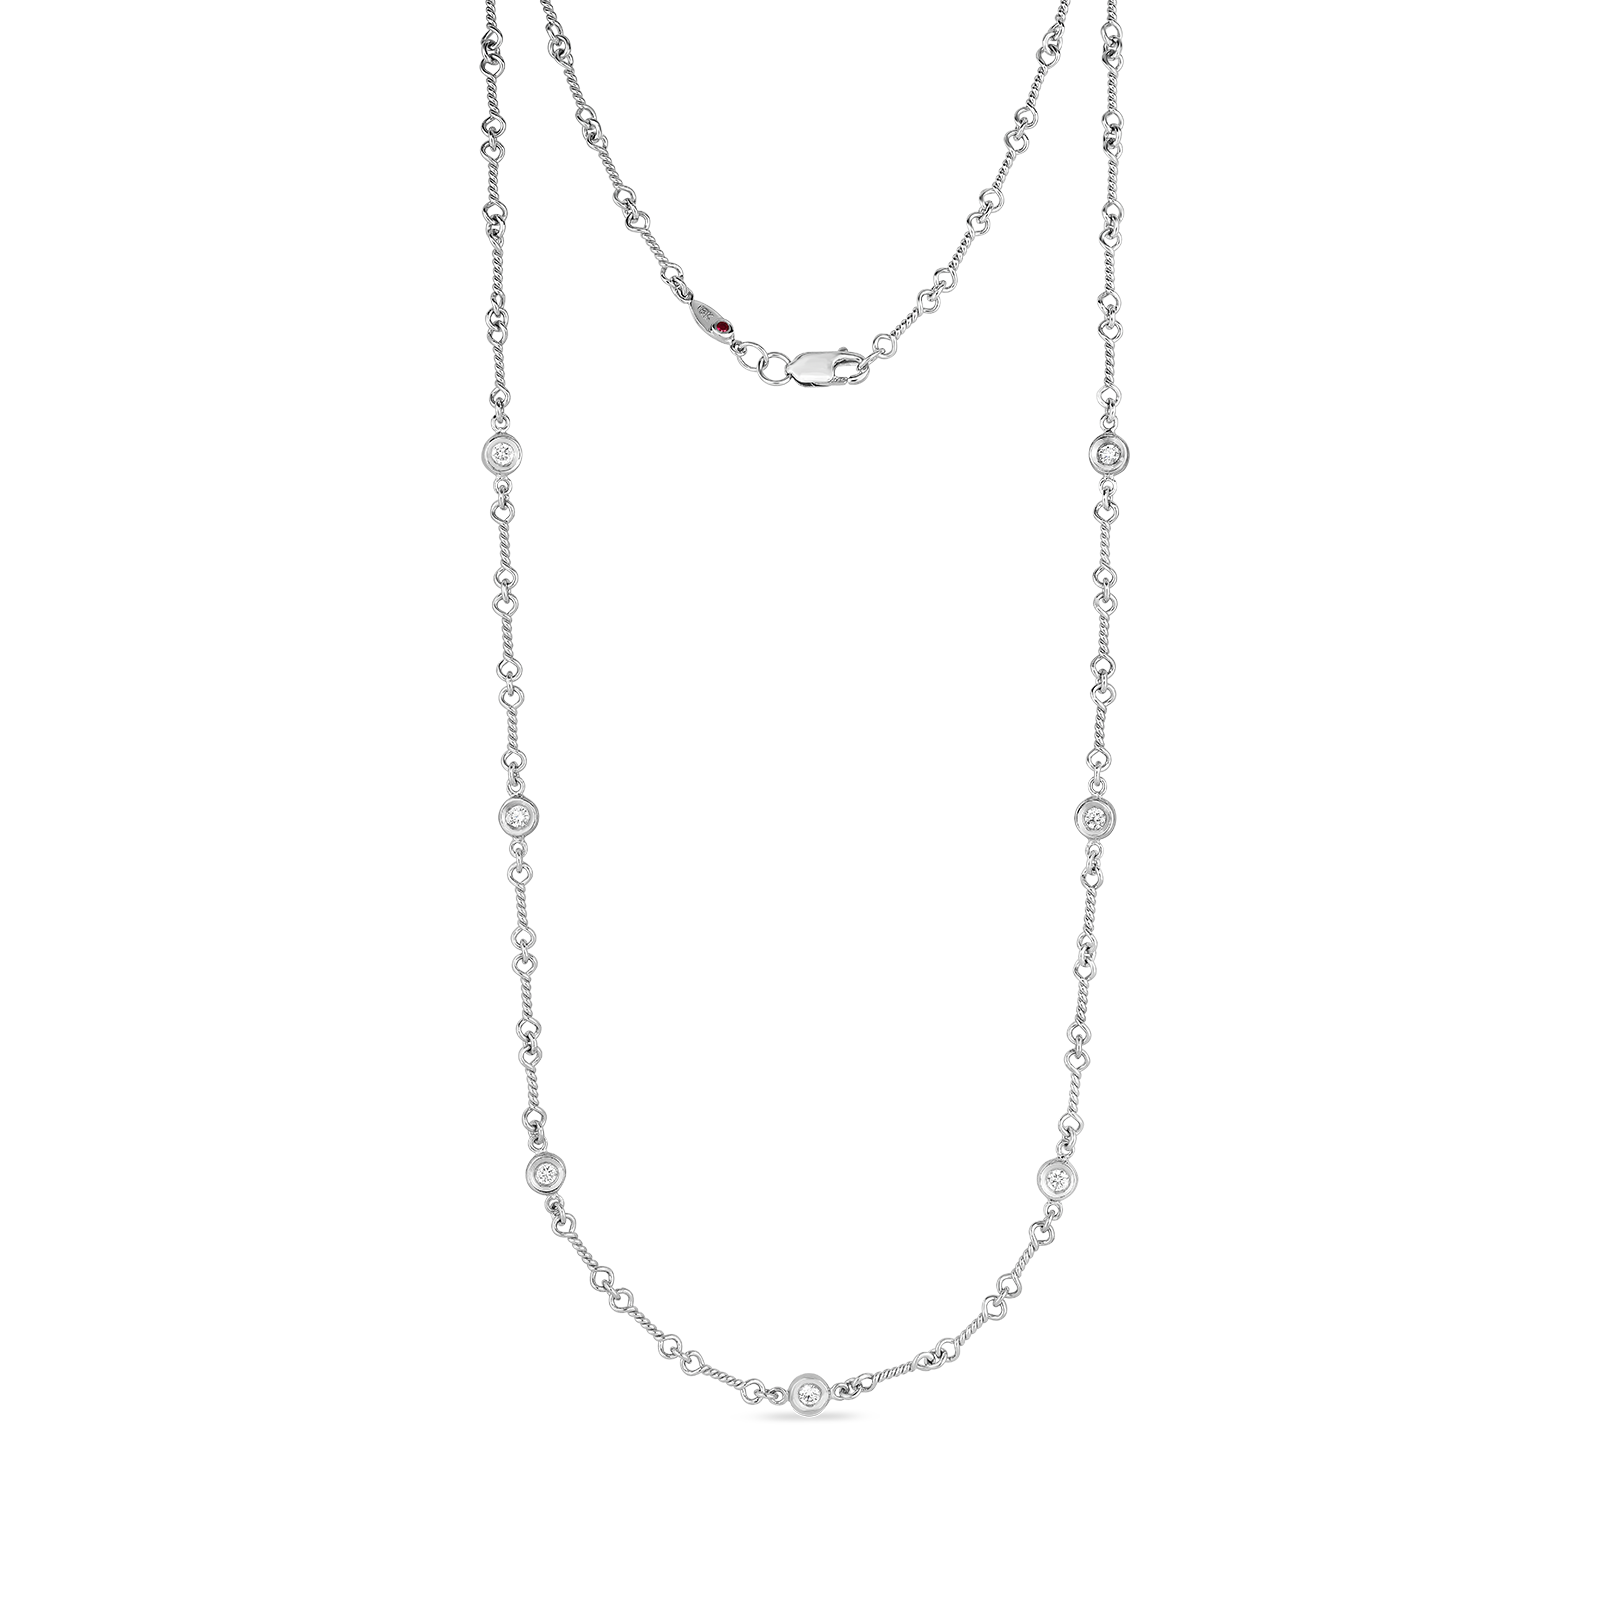 Roberto Coin 18k White Gold Diamonds By The Inch Diamond Necklace